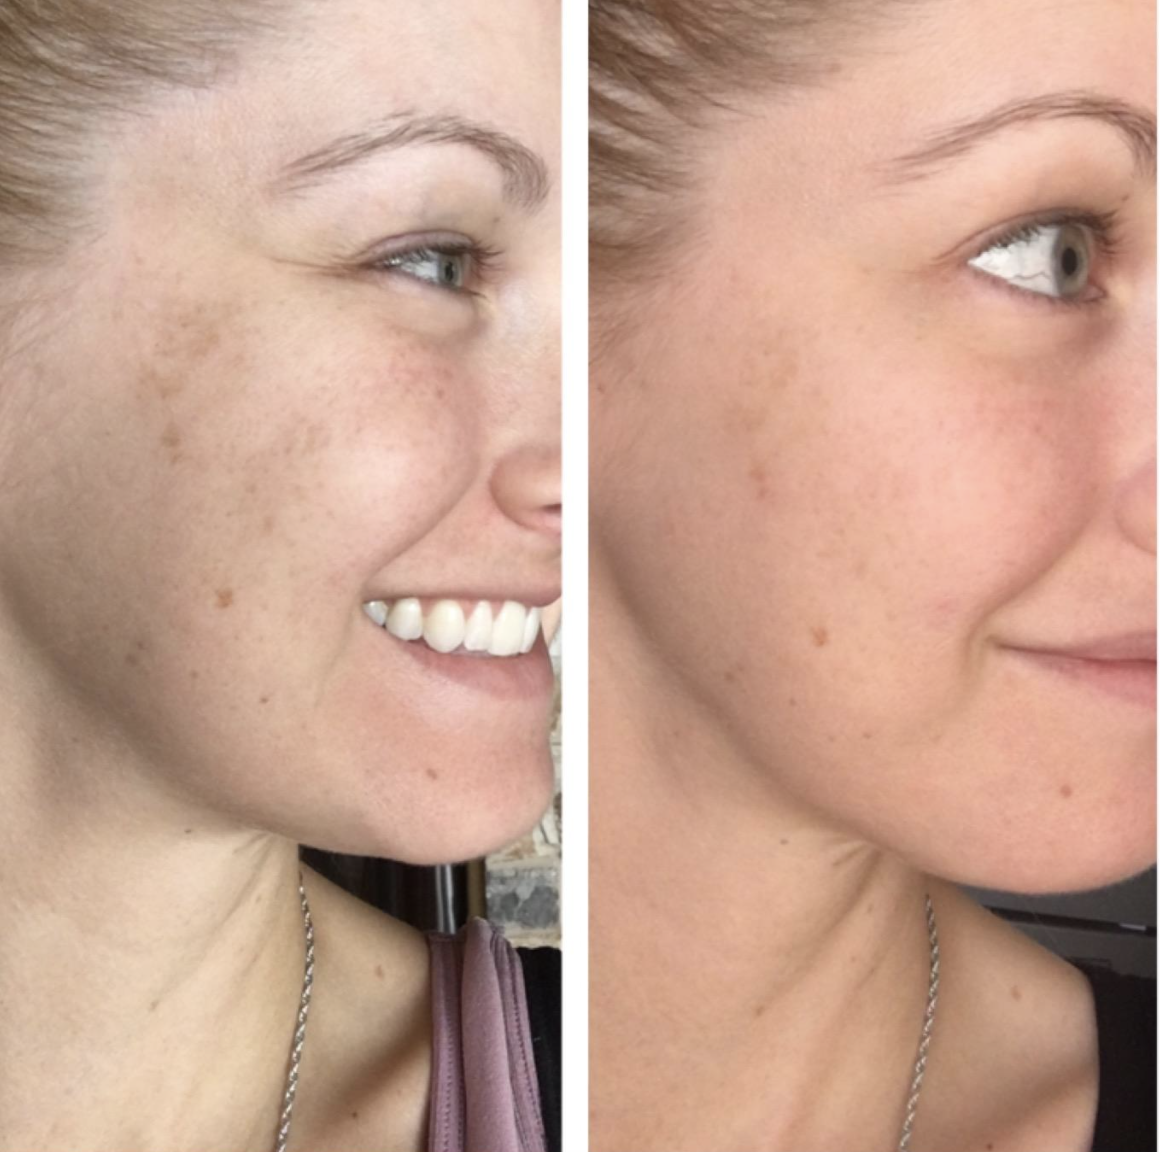 Reviewer showing complexion before and after using the serum